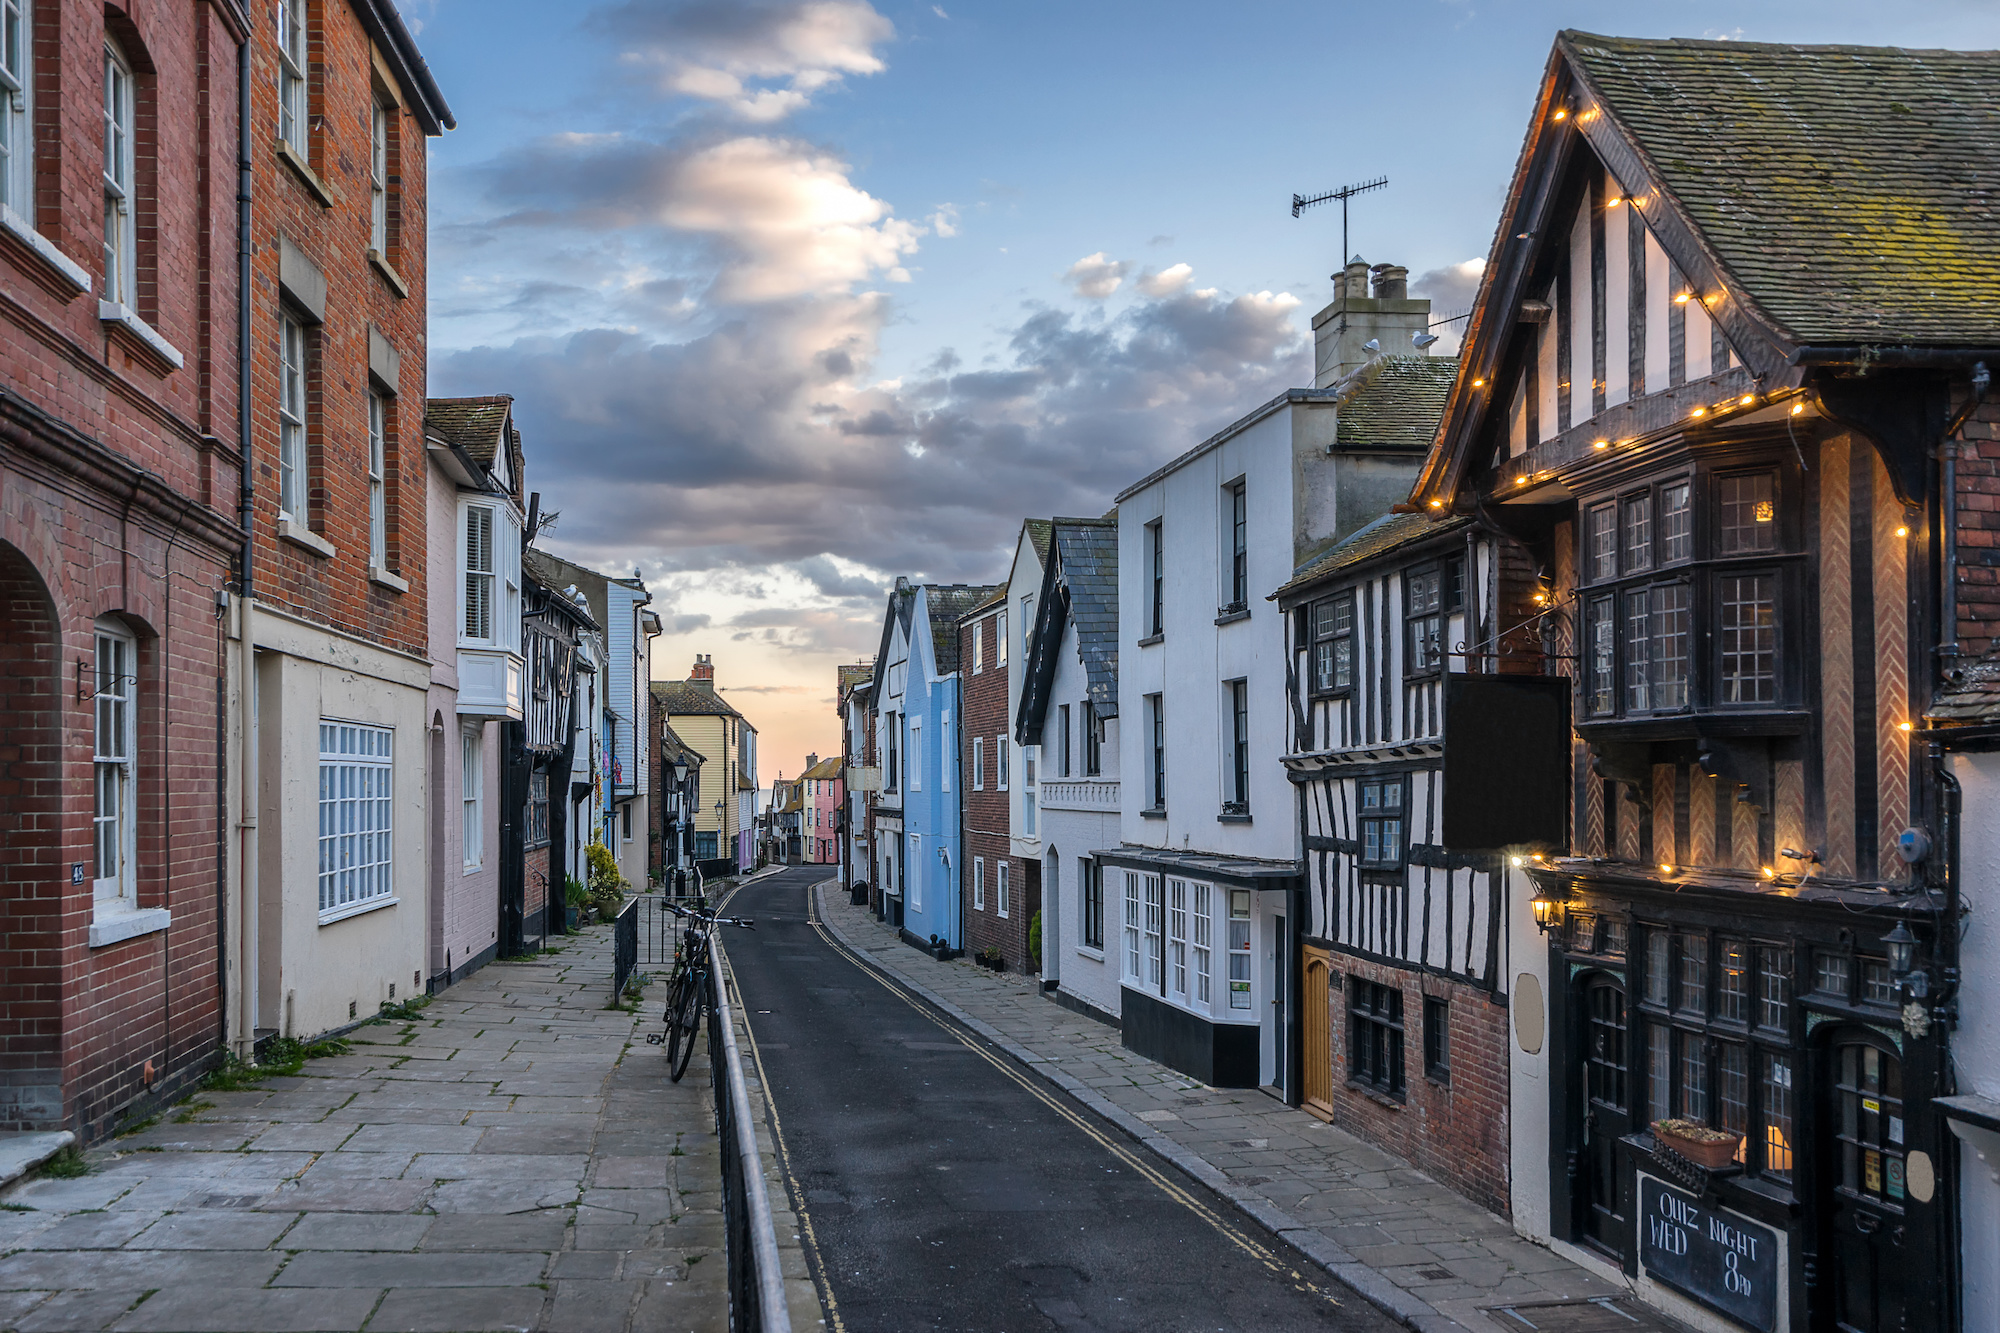 10 Best Things to Do and See in South East England